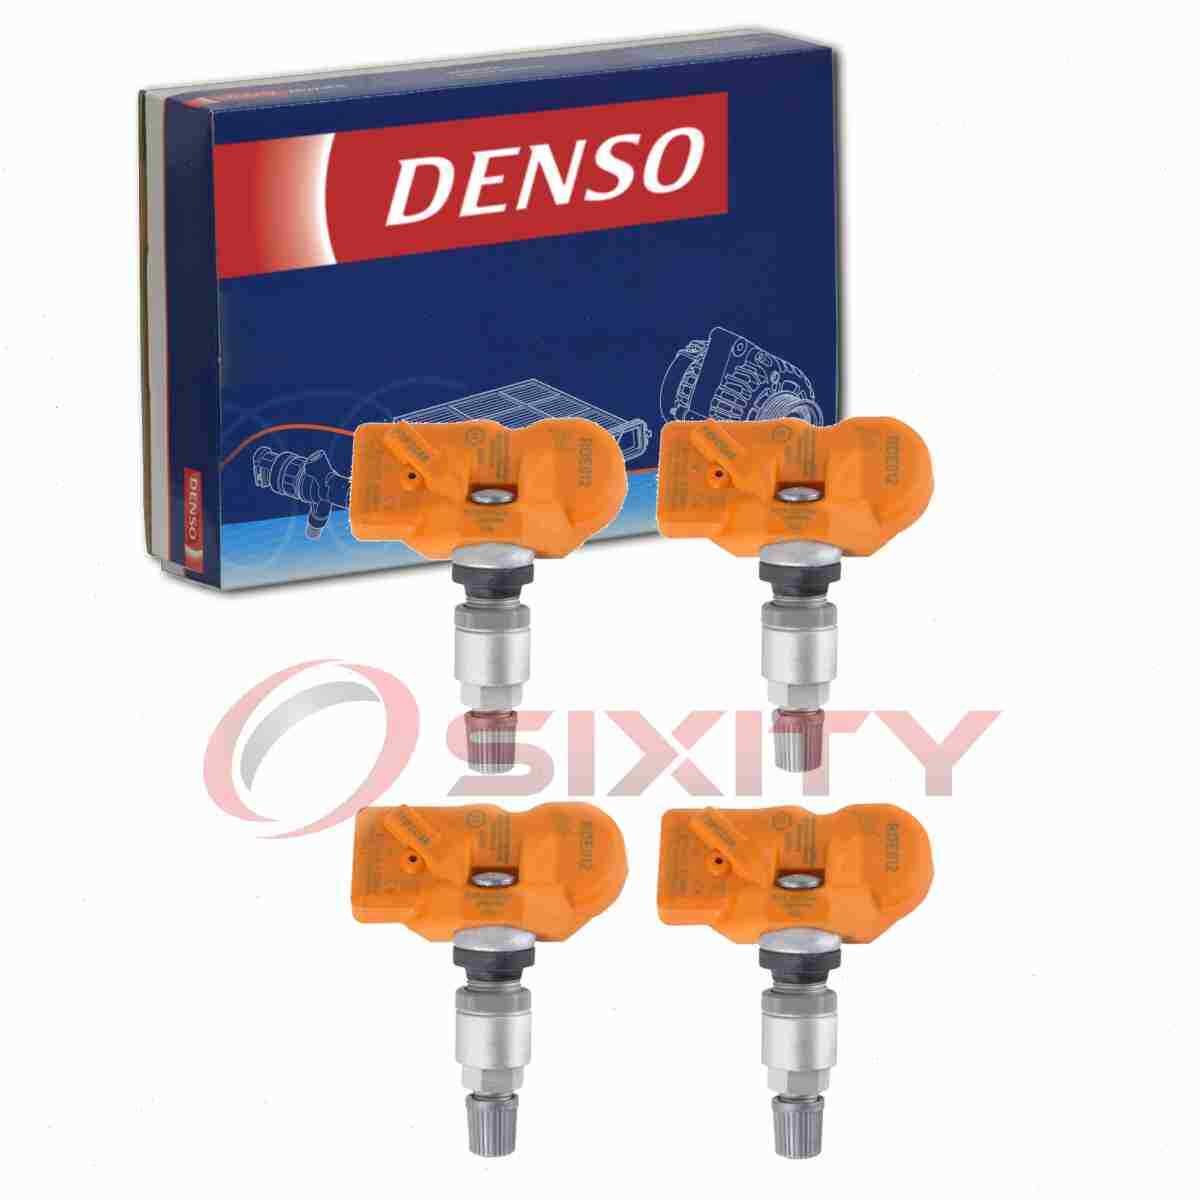 4 pc Denso Tire Pressure Monitoring System Sensors for 2014 BMW 535d Wheel  yb